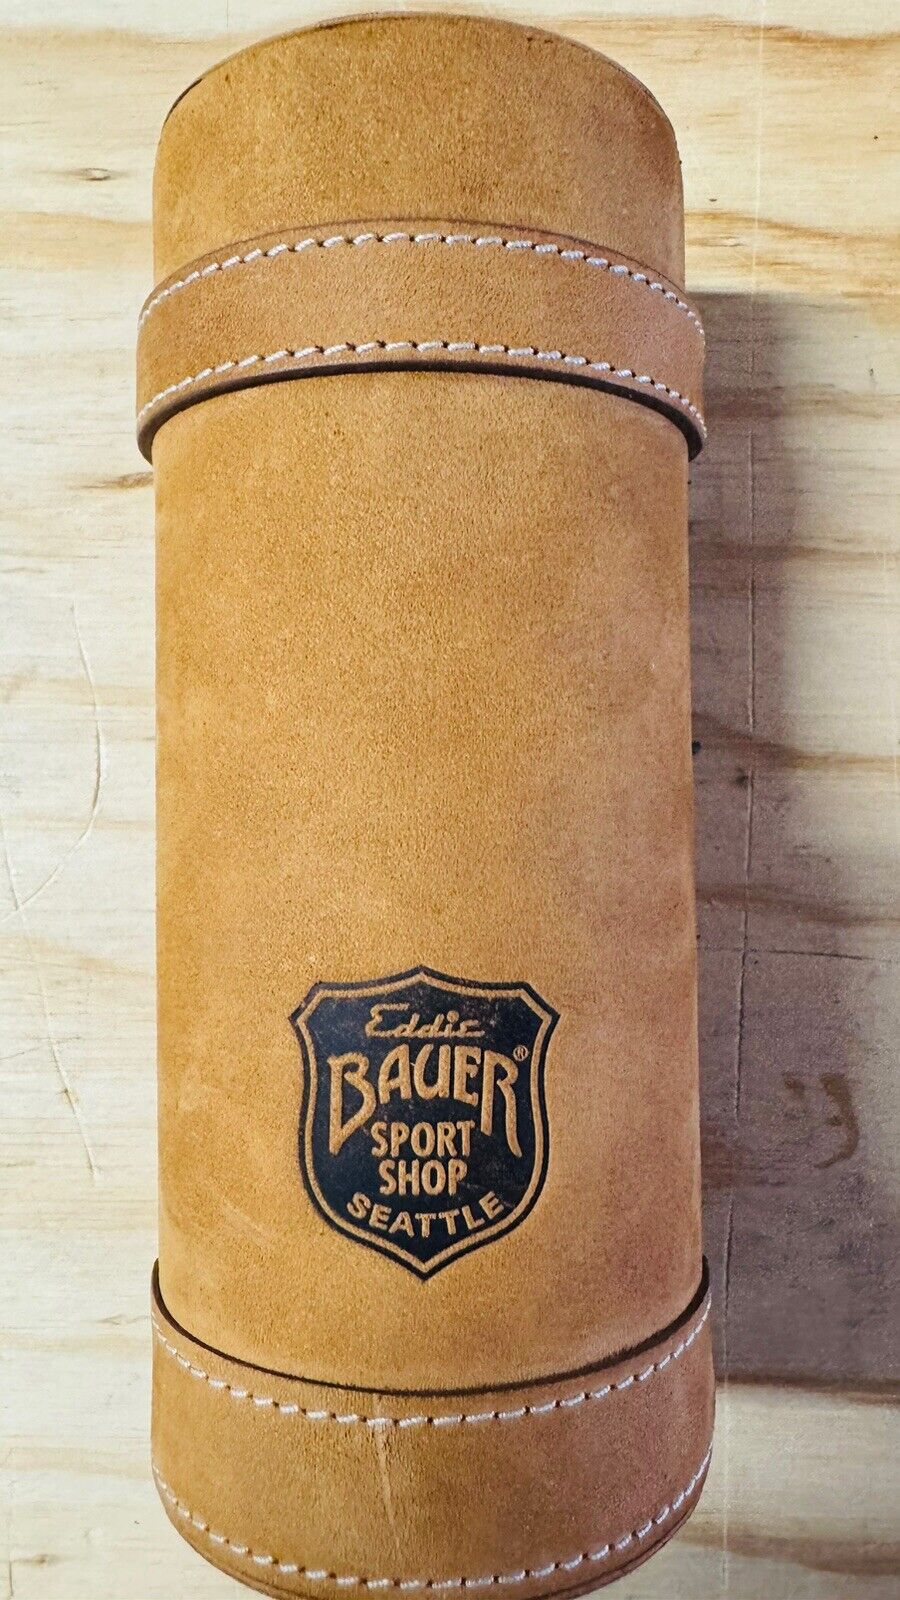 Eddie Bauer Travel Bar - Seattle - This Is A Rare Find. Complete Leather Kit